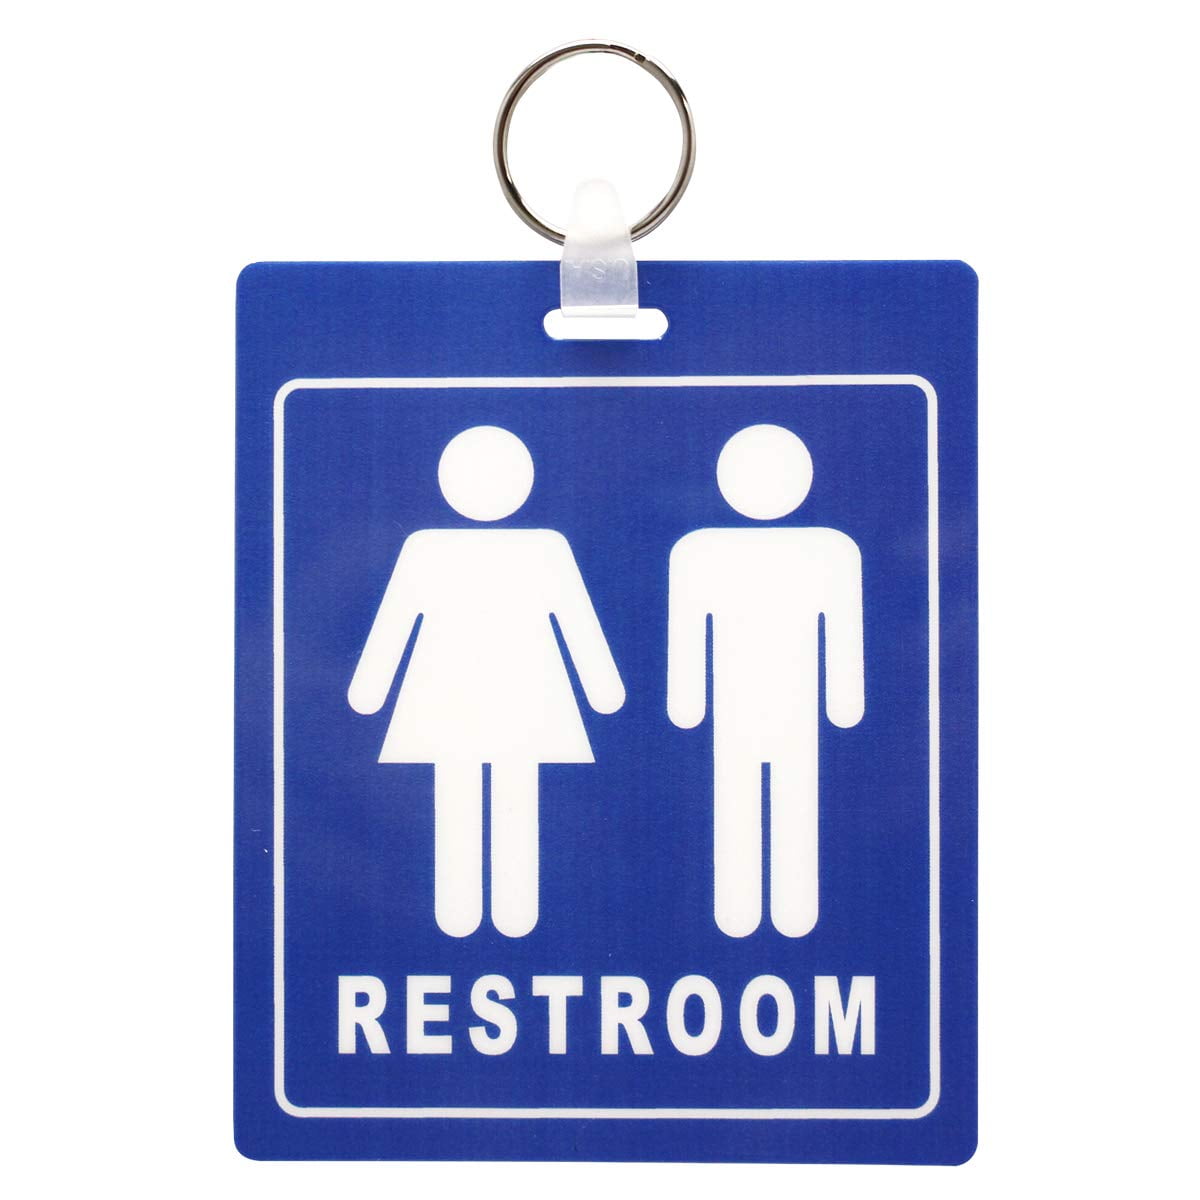 CGSignLab 5-Pack 24x24 Gender Neutral Toilet Sign in Blue Window Cling 